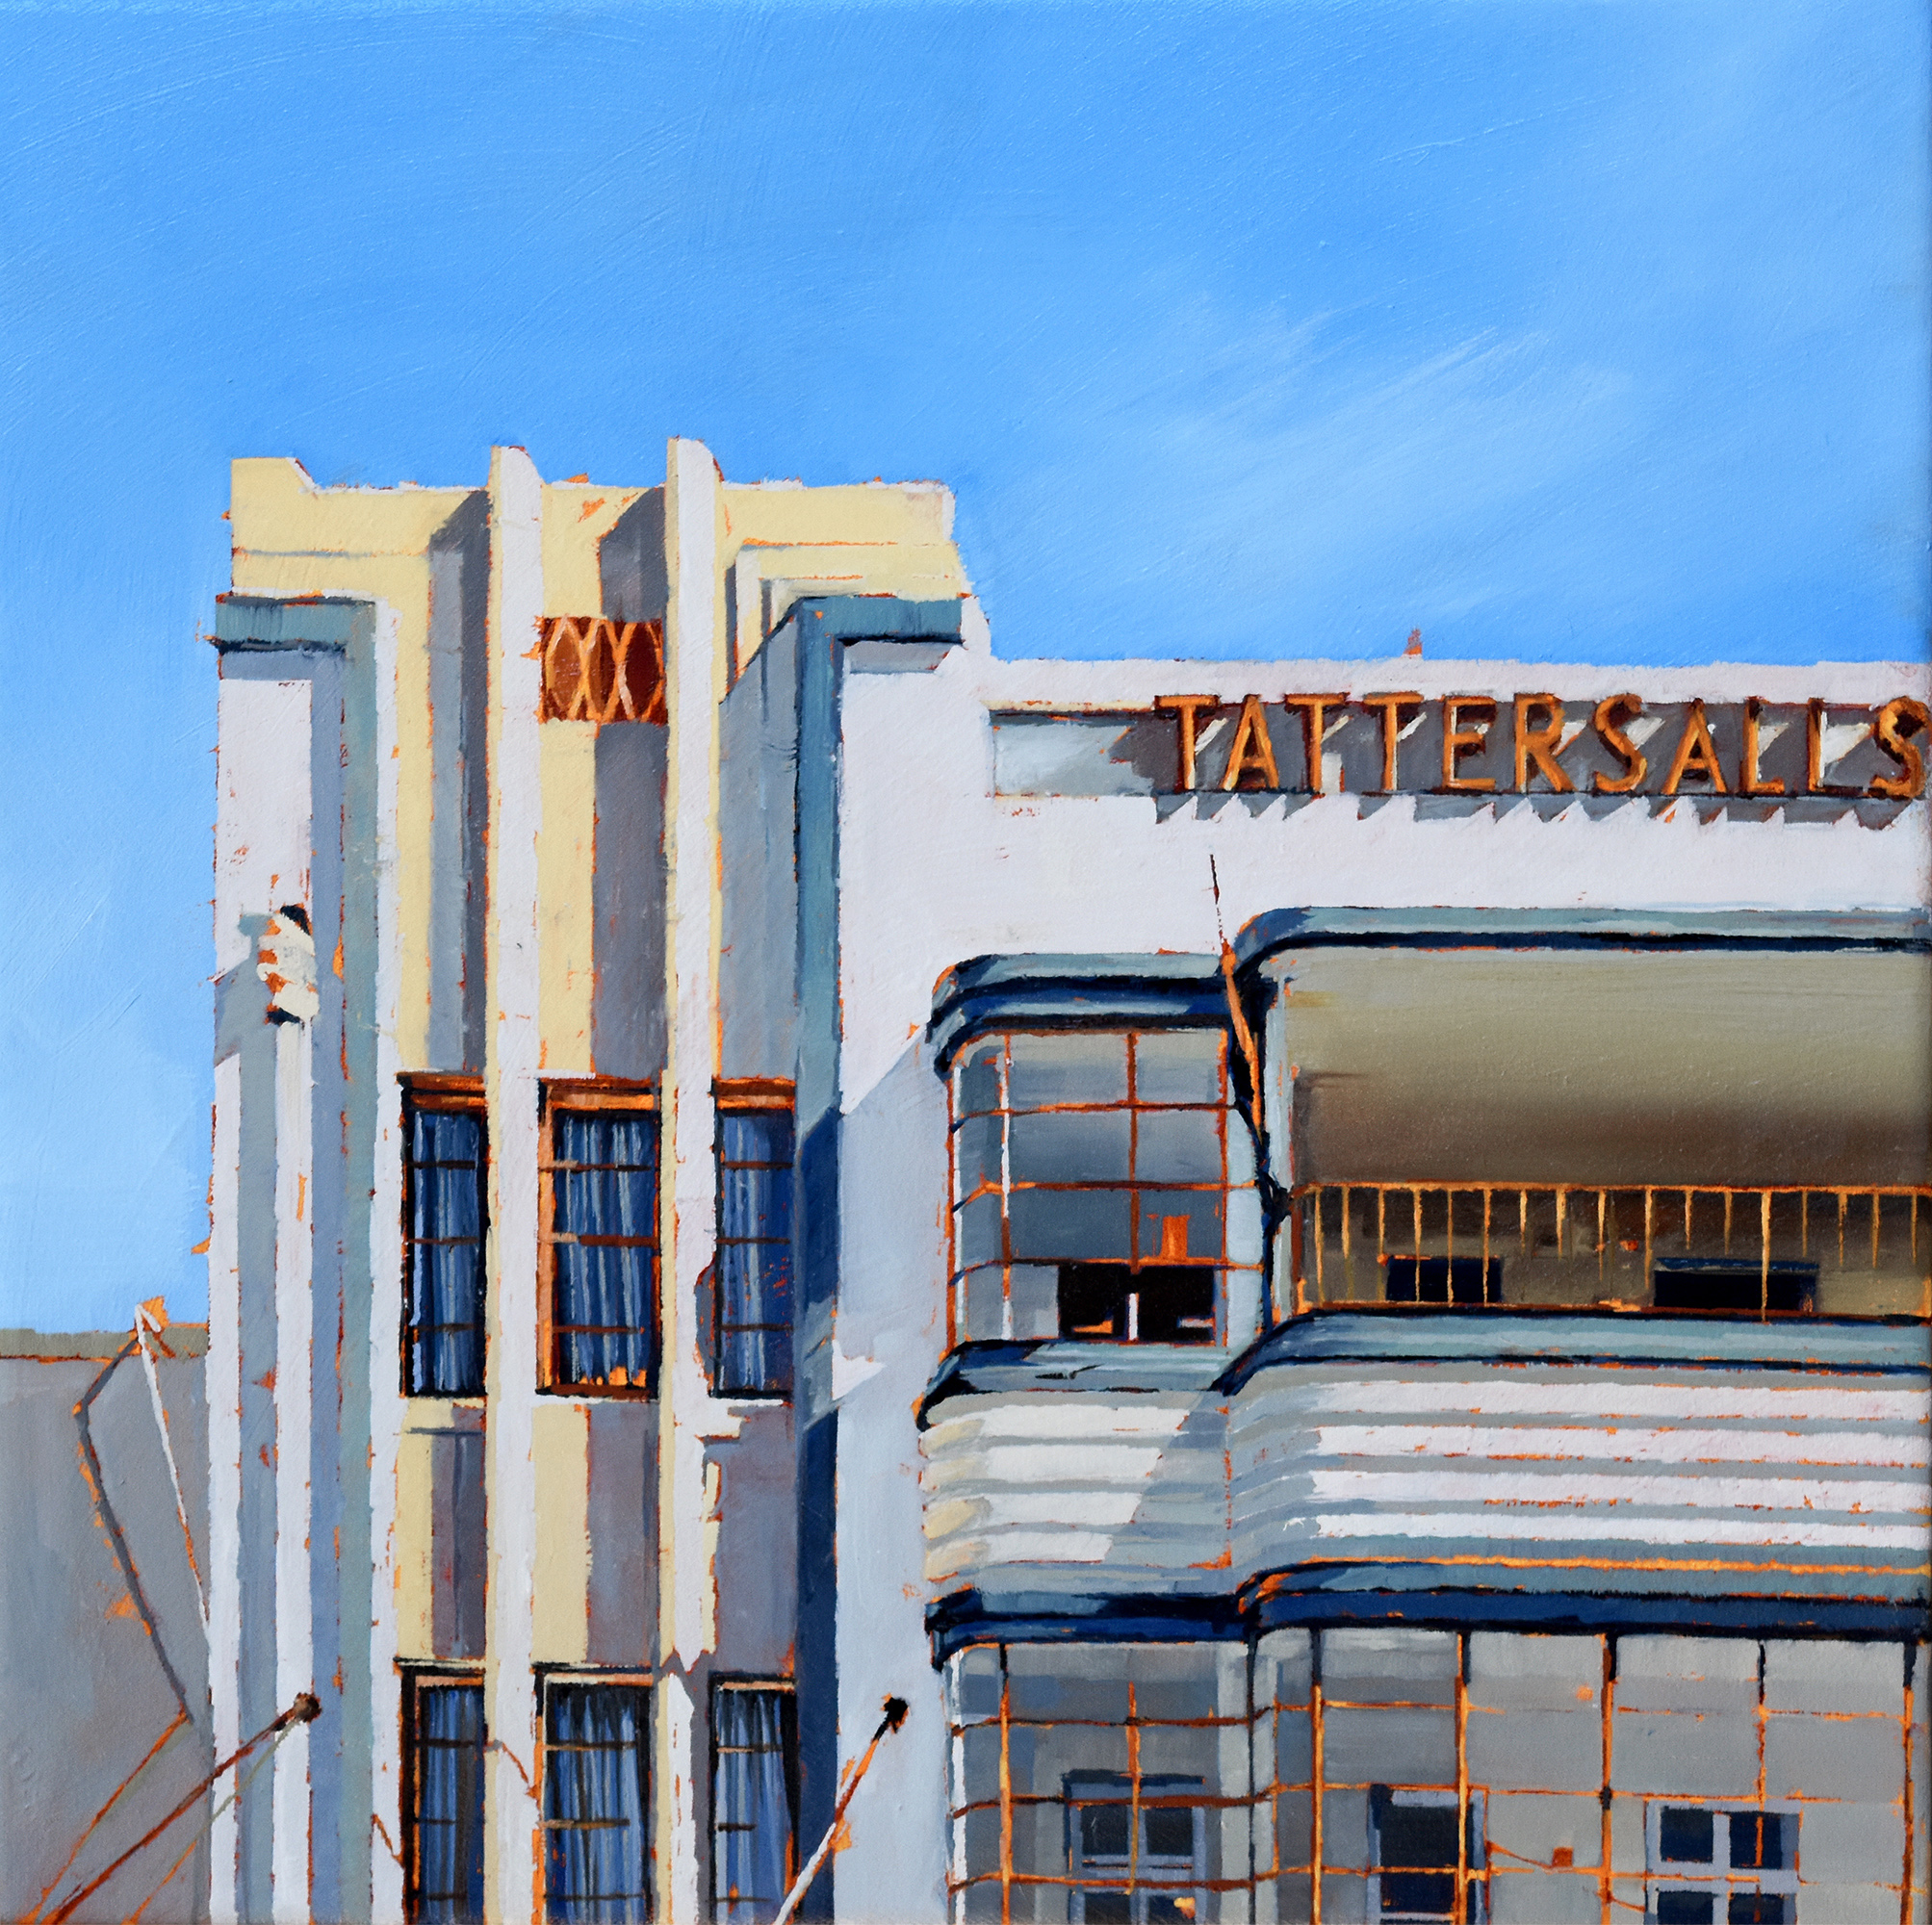 Oil painting of Tattersalls Hotel, showing the art deco facade including upper balcony and windows, against a blue sky